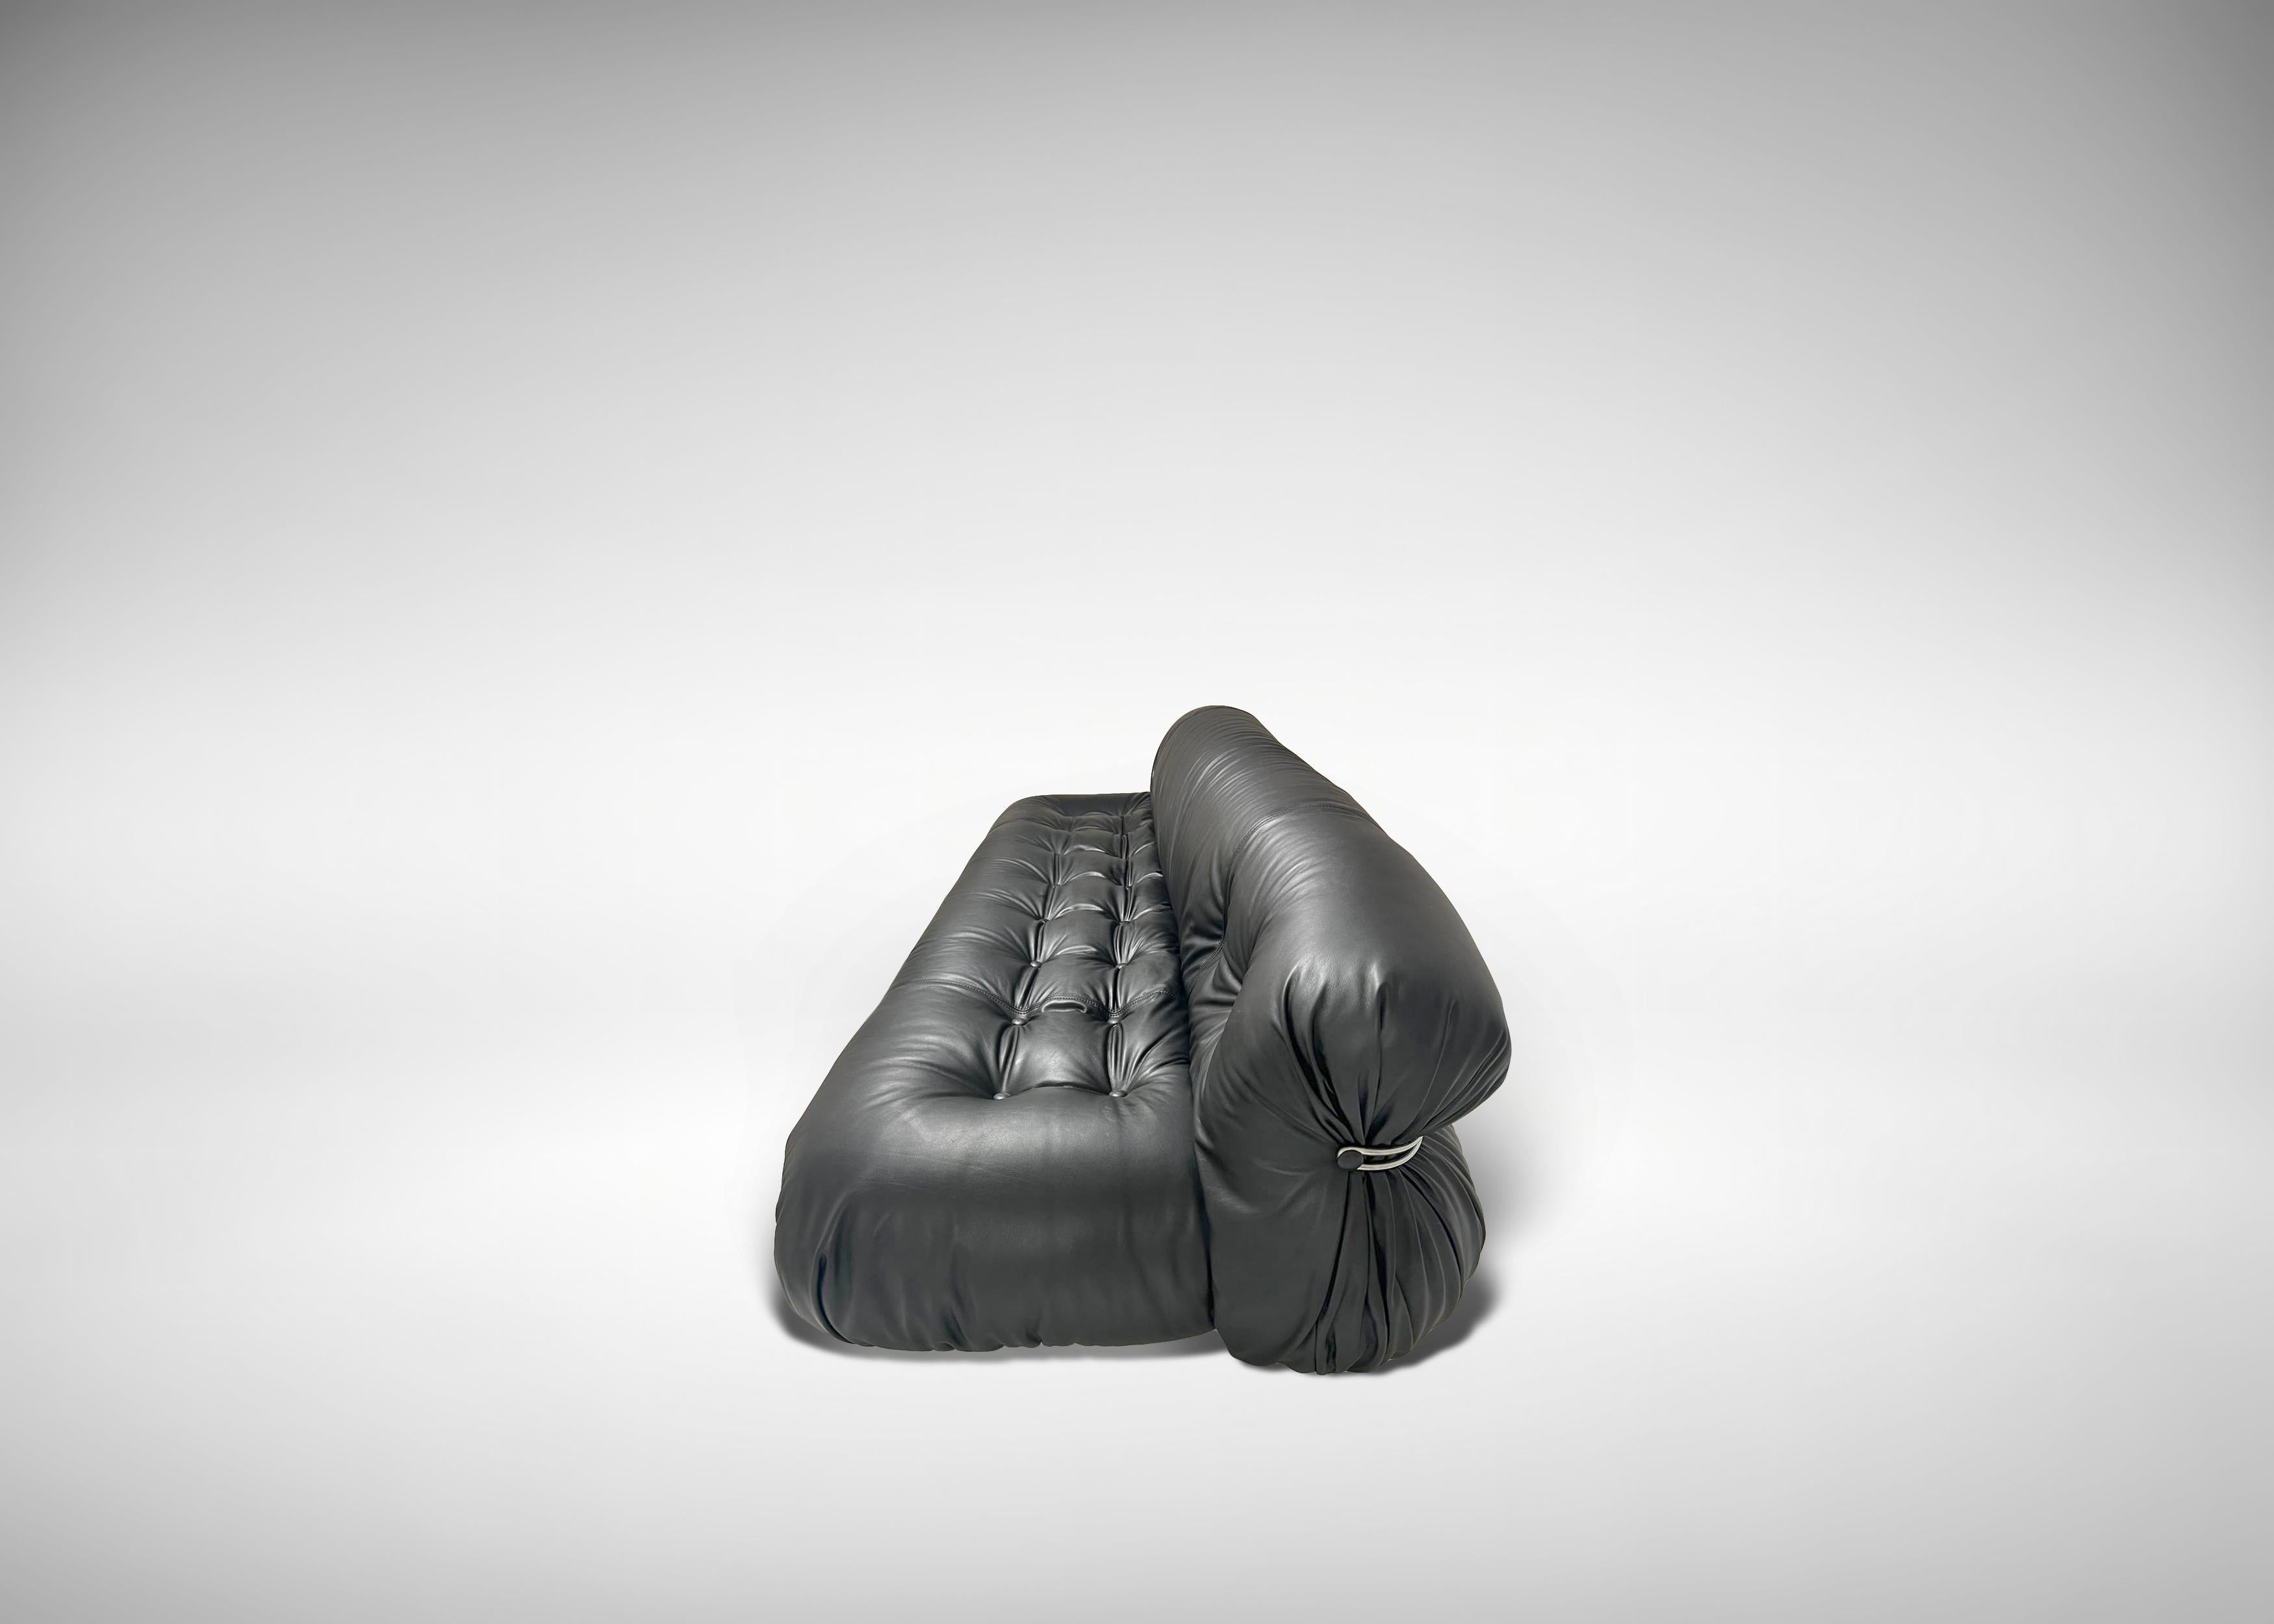 Soriana Three Seater Sofa for Cassina, Italy 1970s.

Black Leather, original Cassina Label. Outstanding piece in near perfect condition, with original Cassina Labels. The most celebrated sofa by Afra and Tobia Scarpa, Winner of the 